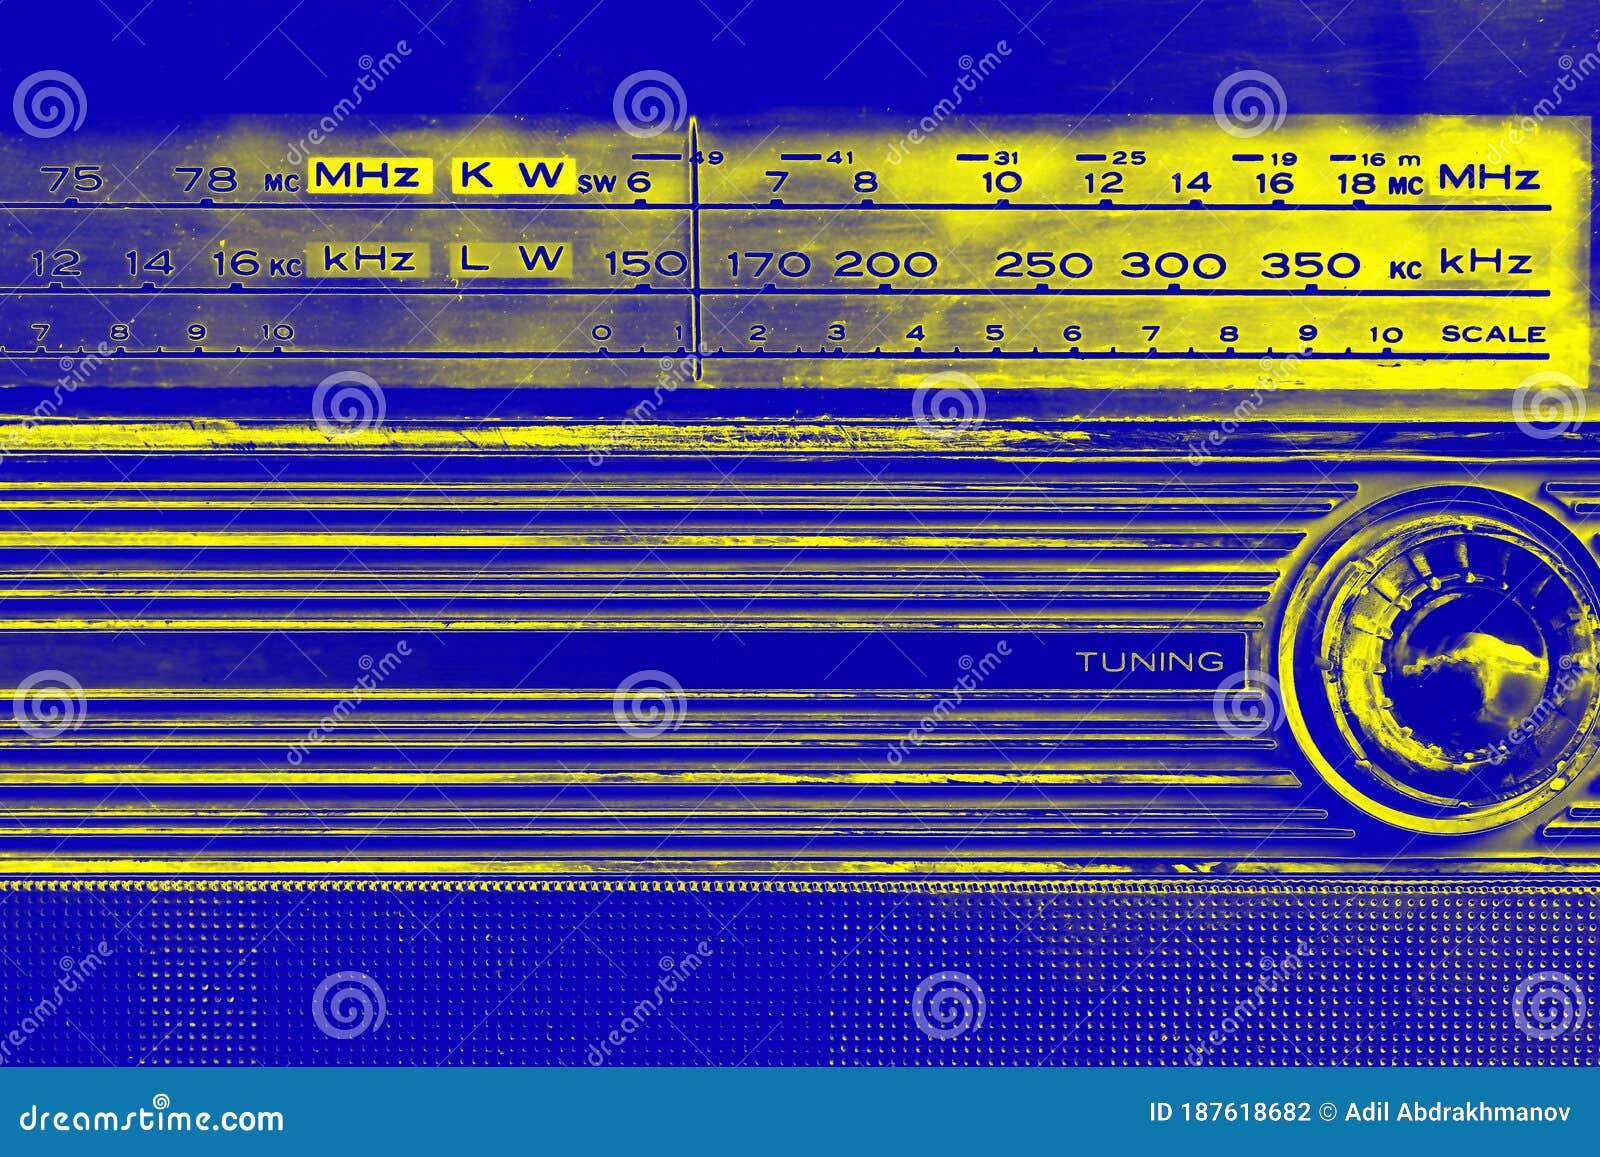 an old radio frequency tuning in abstract colorful style. retro background. retro music concept. music radio sound wave. classic v